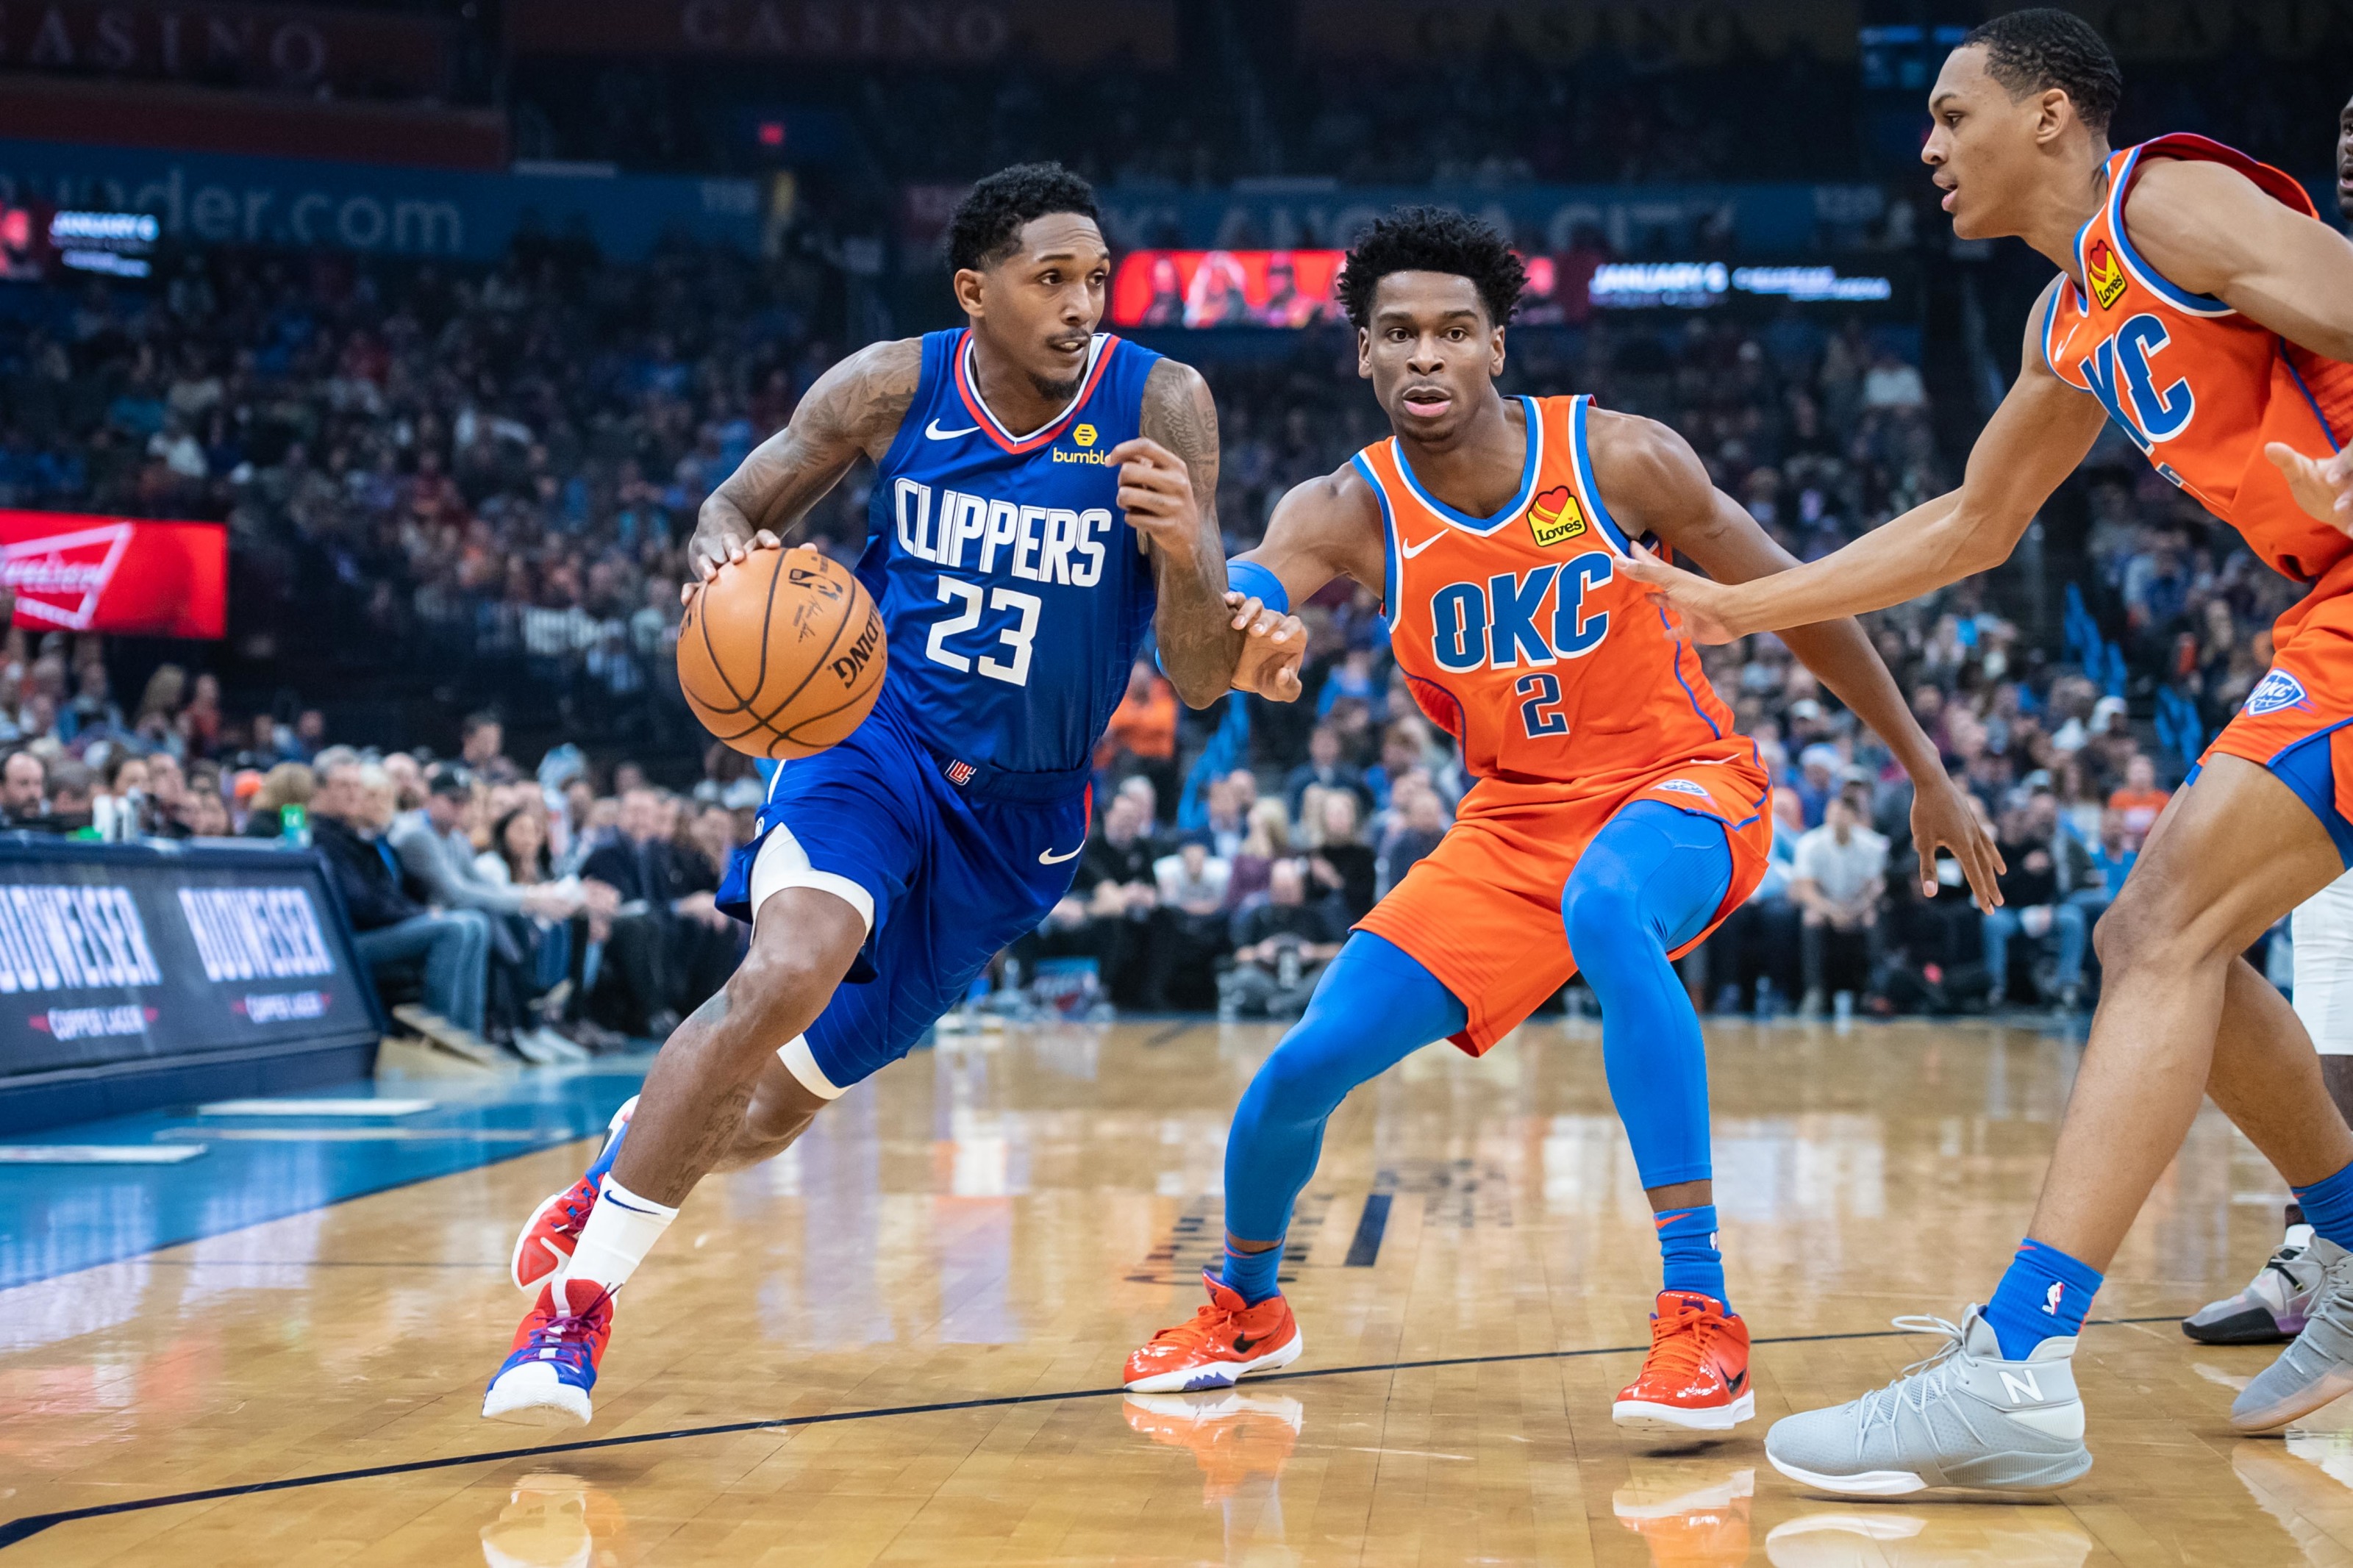 Clippers' Lou Williams is a potential trade target for a playoff team